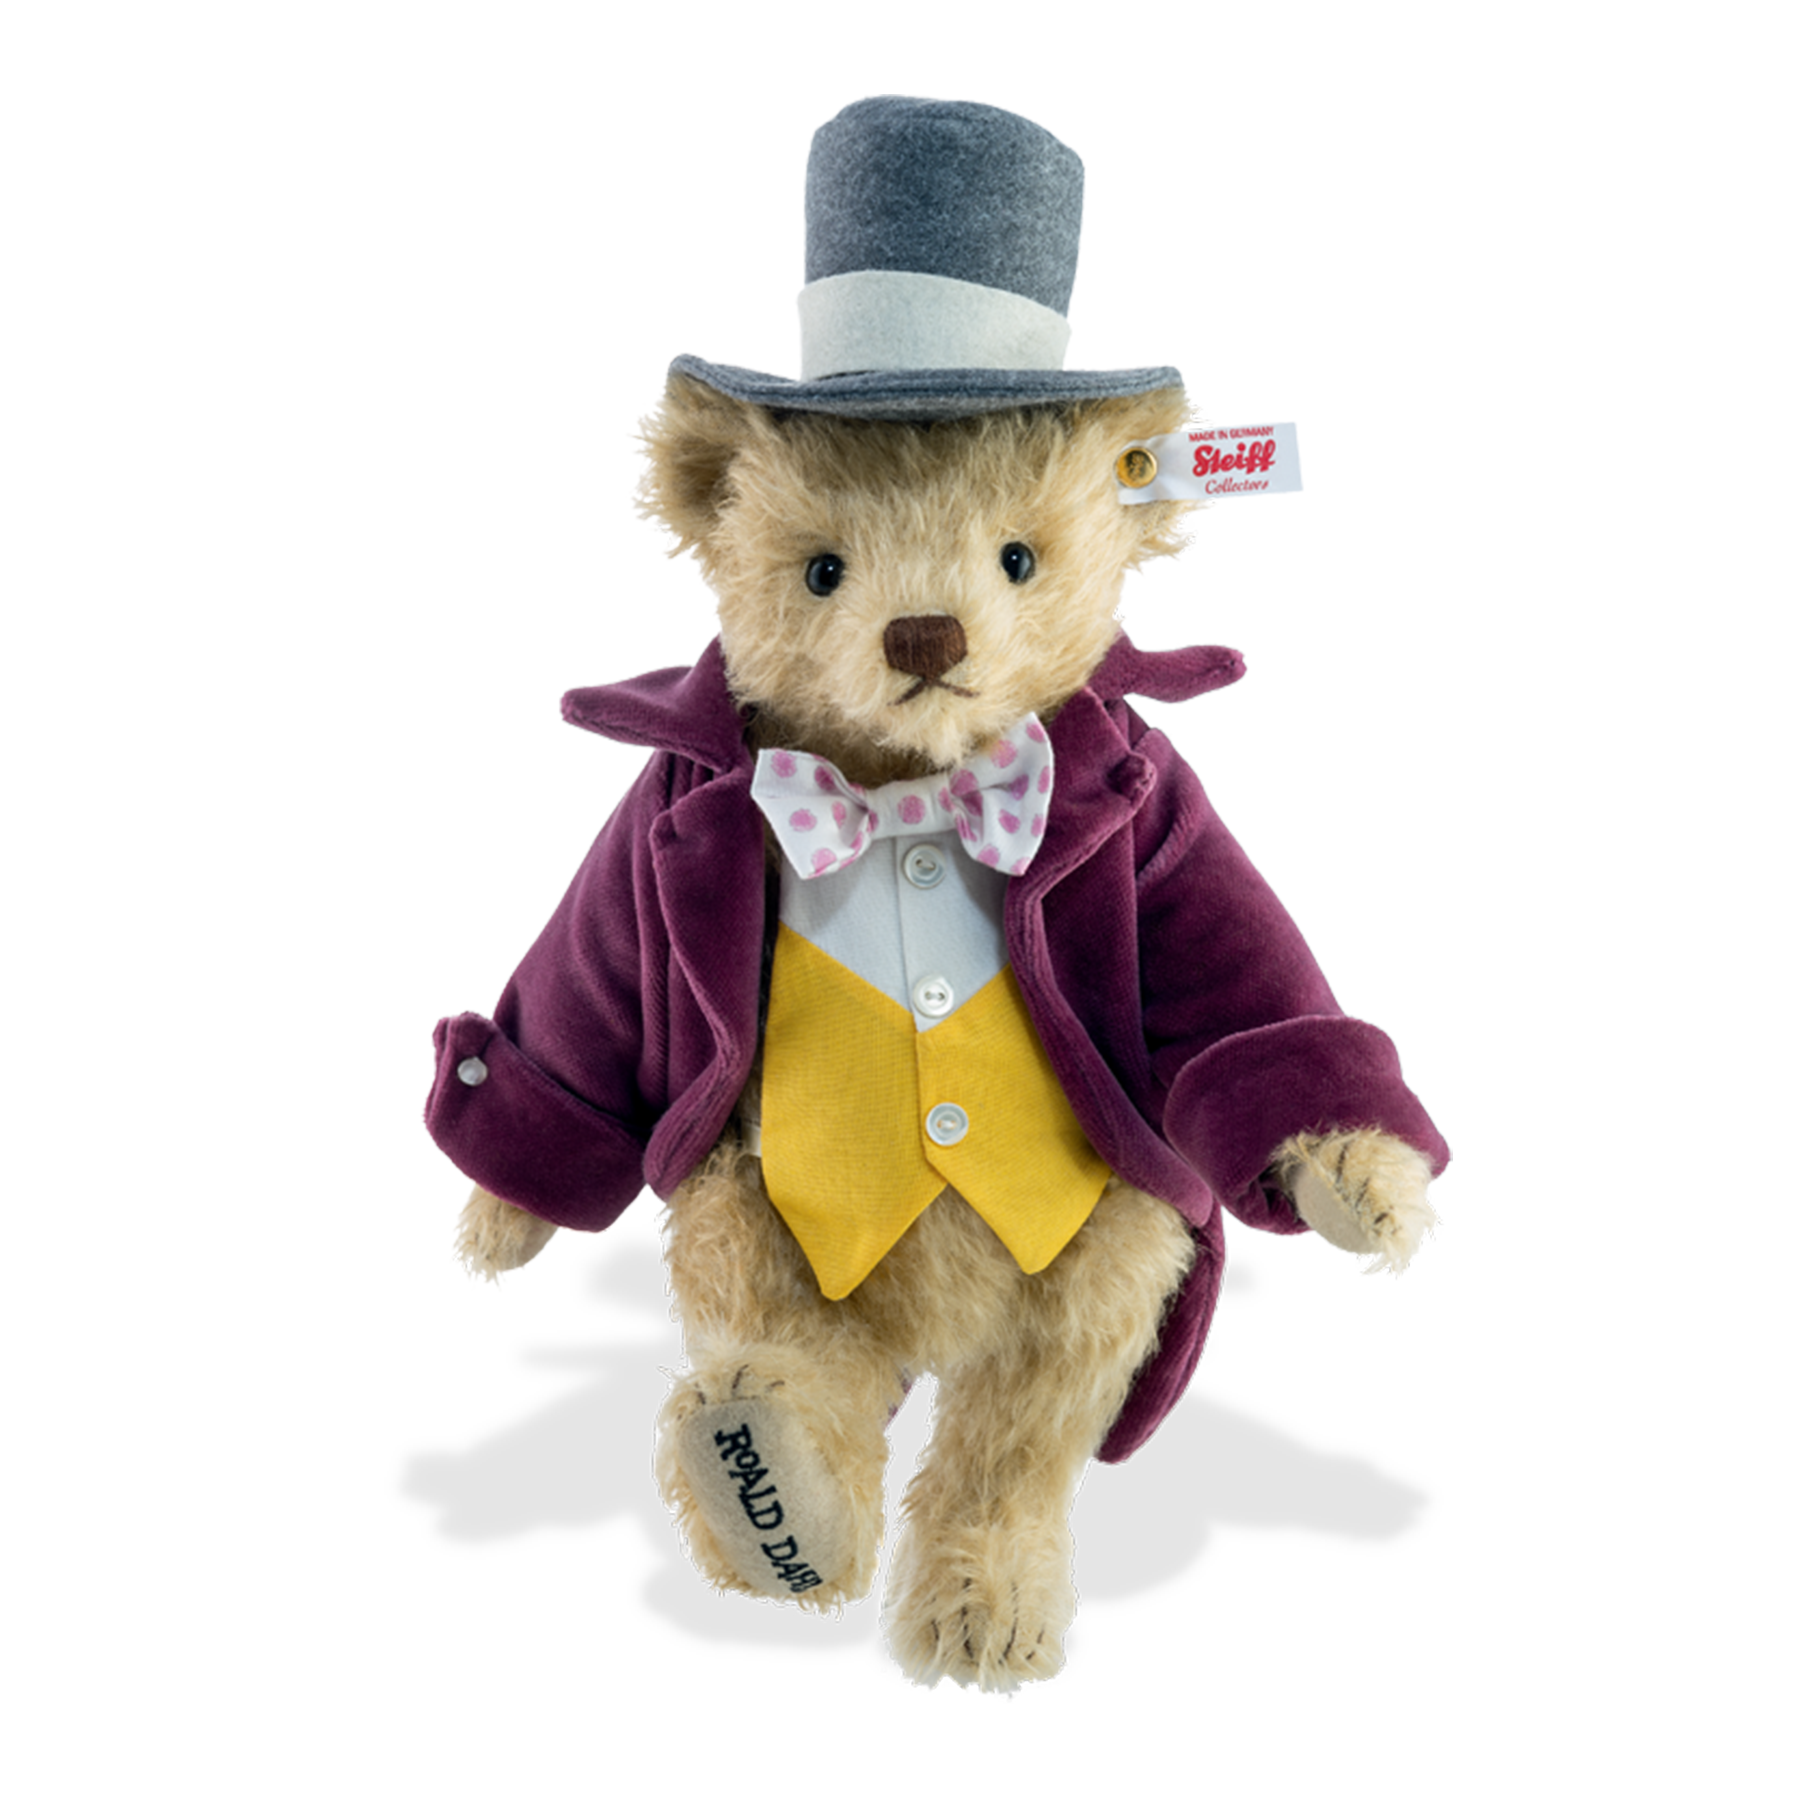 Steiff Willy Wonka Teddy Bear made from the finest beige mohair, fully jointed.  Dressed in a dark pink jacket, yellow and white waistcoat and matching dark pink and white bow tie. Limited edition of just 1,916 pieces.